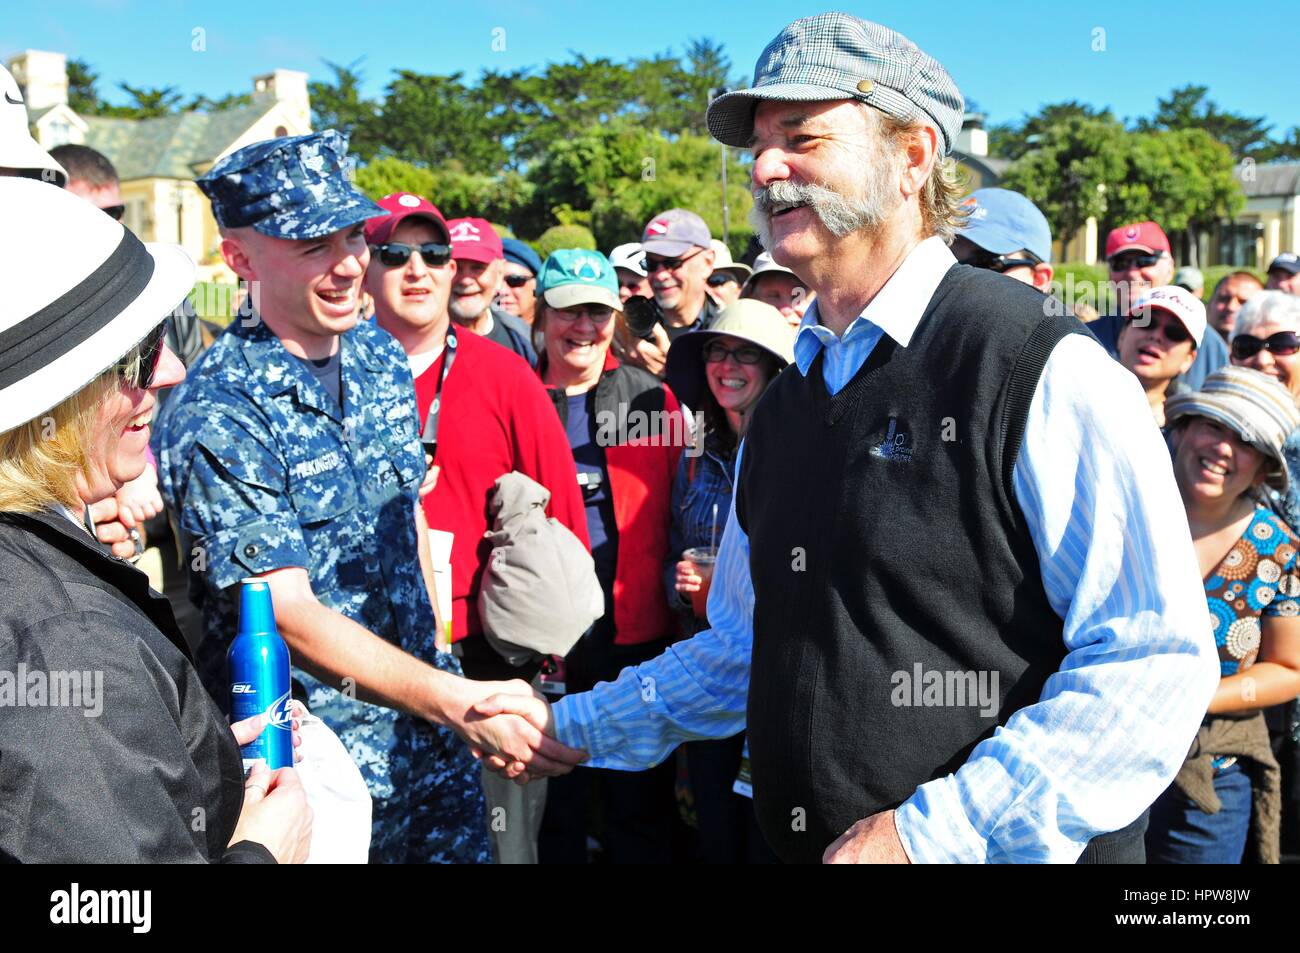 Actor and comedian Bill Murray sporting a tweed cap and Mutton Chops mustache greets the crowd during the AT&T Pebble Beach National Pro-Am golf tournament February 6, 2013 in Monterey, California. Stock Photo